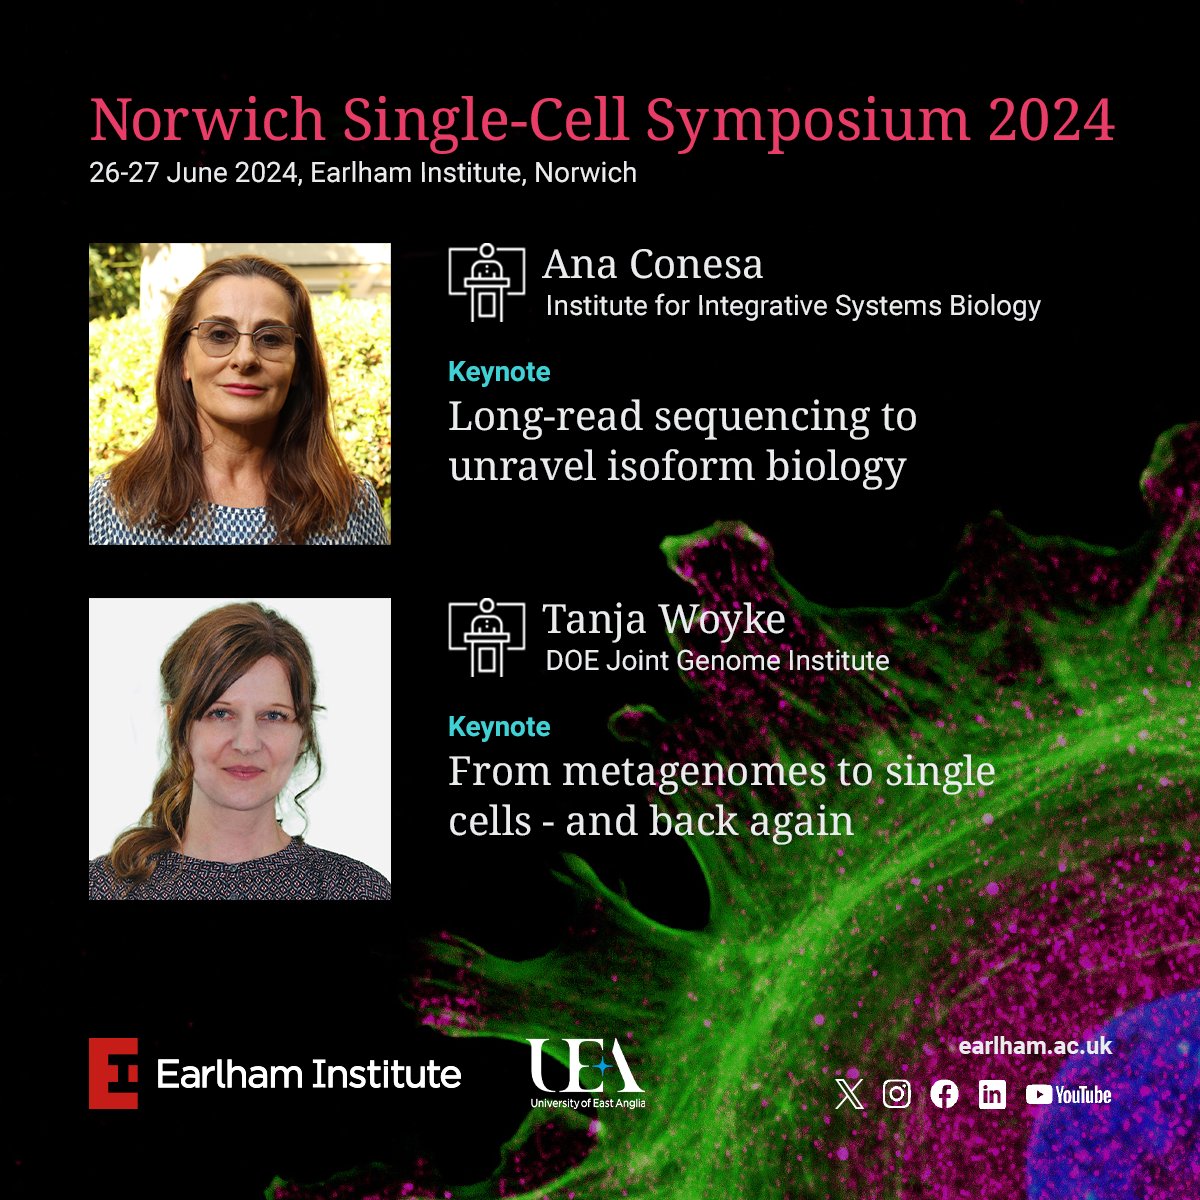 📣 We're excited to announce Dr Ana Conesa and Dr Tanja Woyke as our Keynote Speakers for the 2024 #Norwich #SingleCell Symposium! #EISingleCell24 ⤵ Register your interest now to be kept updated! okt.to/AvcukL @anaconesa @twoyke @i2sysbio @jgi @biouea